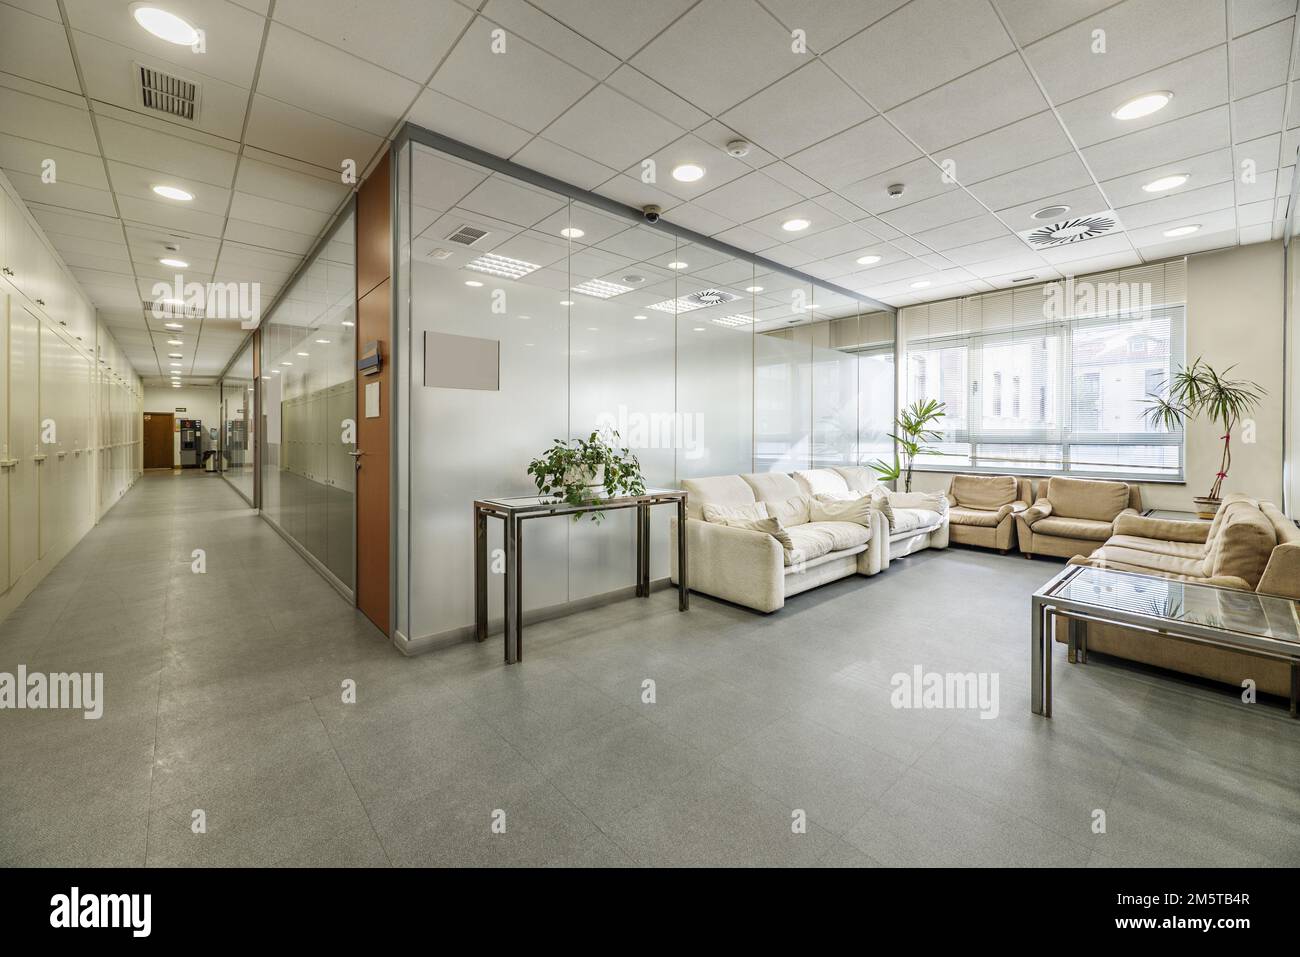 Corridor of an office building and separate offices with glass partitions, waiting areas with sofas and technical ceilings Stock Photo